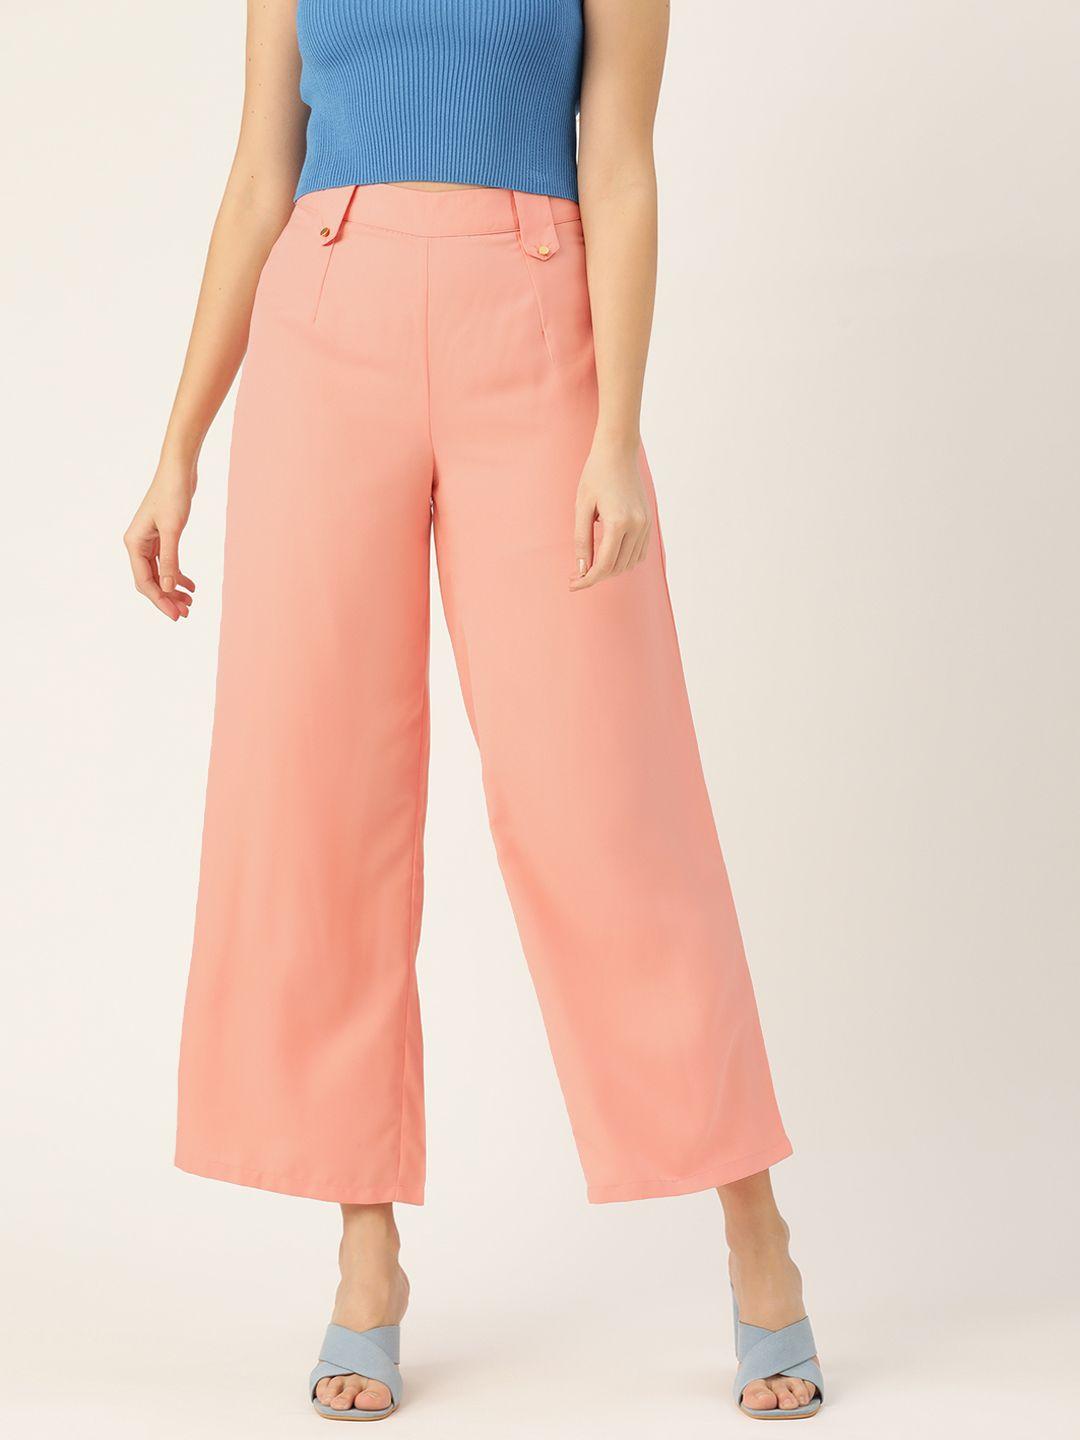 dressberry-women-peach-coloured-textured-knit-parallel-trousers